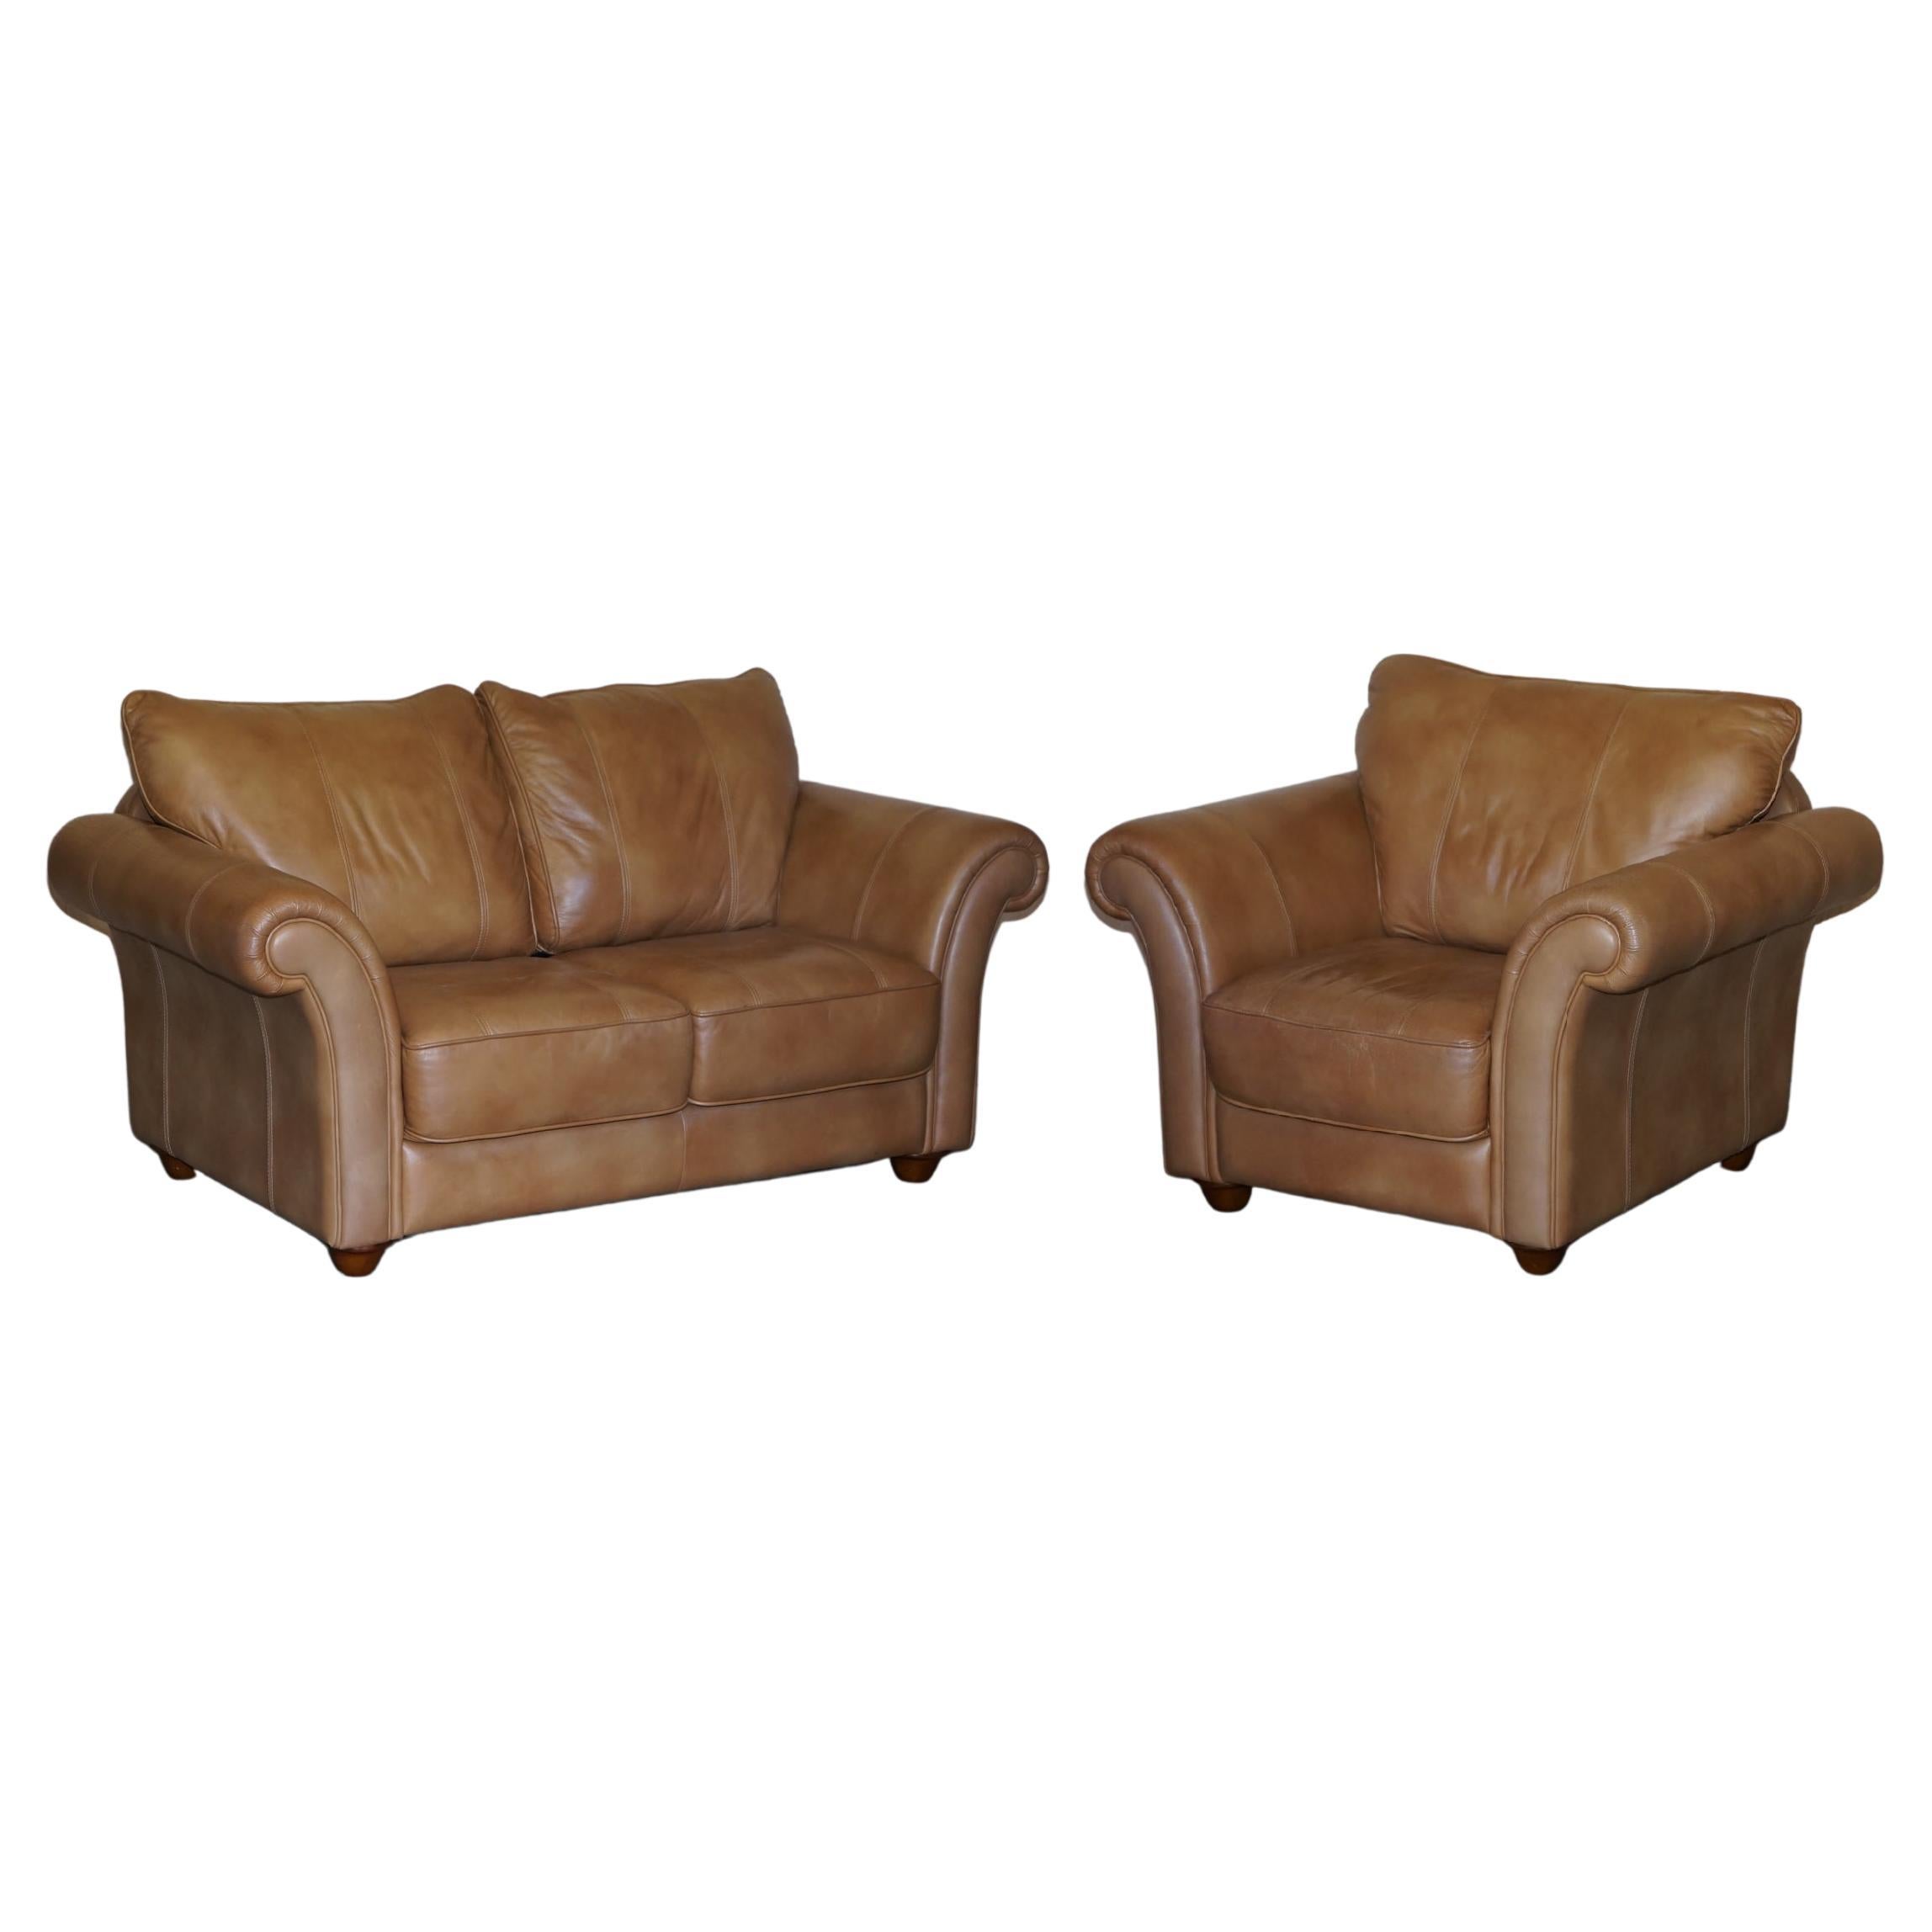 Lovely Contemporary Tan Brown Leather Two Seat Sofa & Matching Armchair